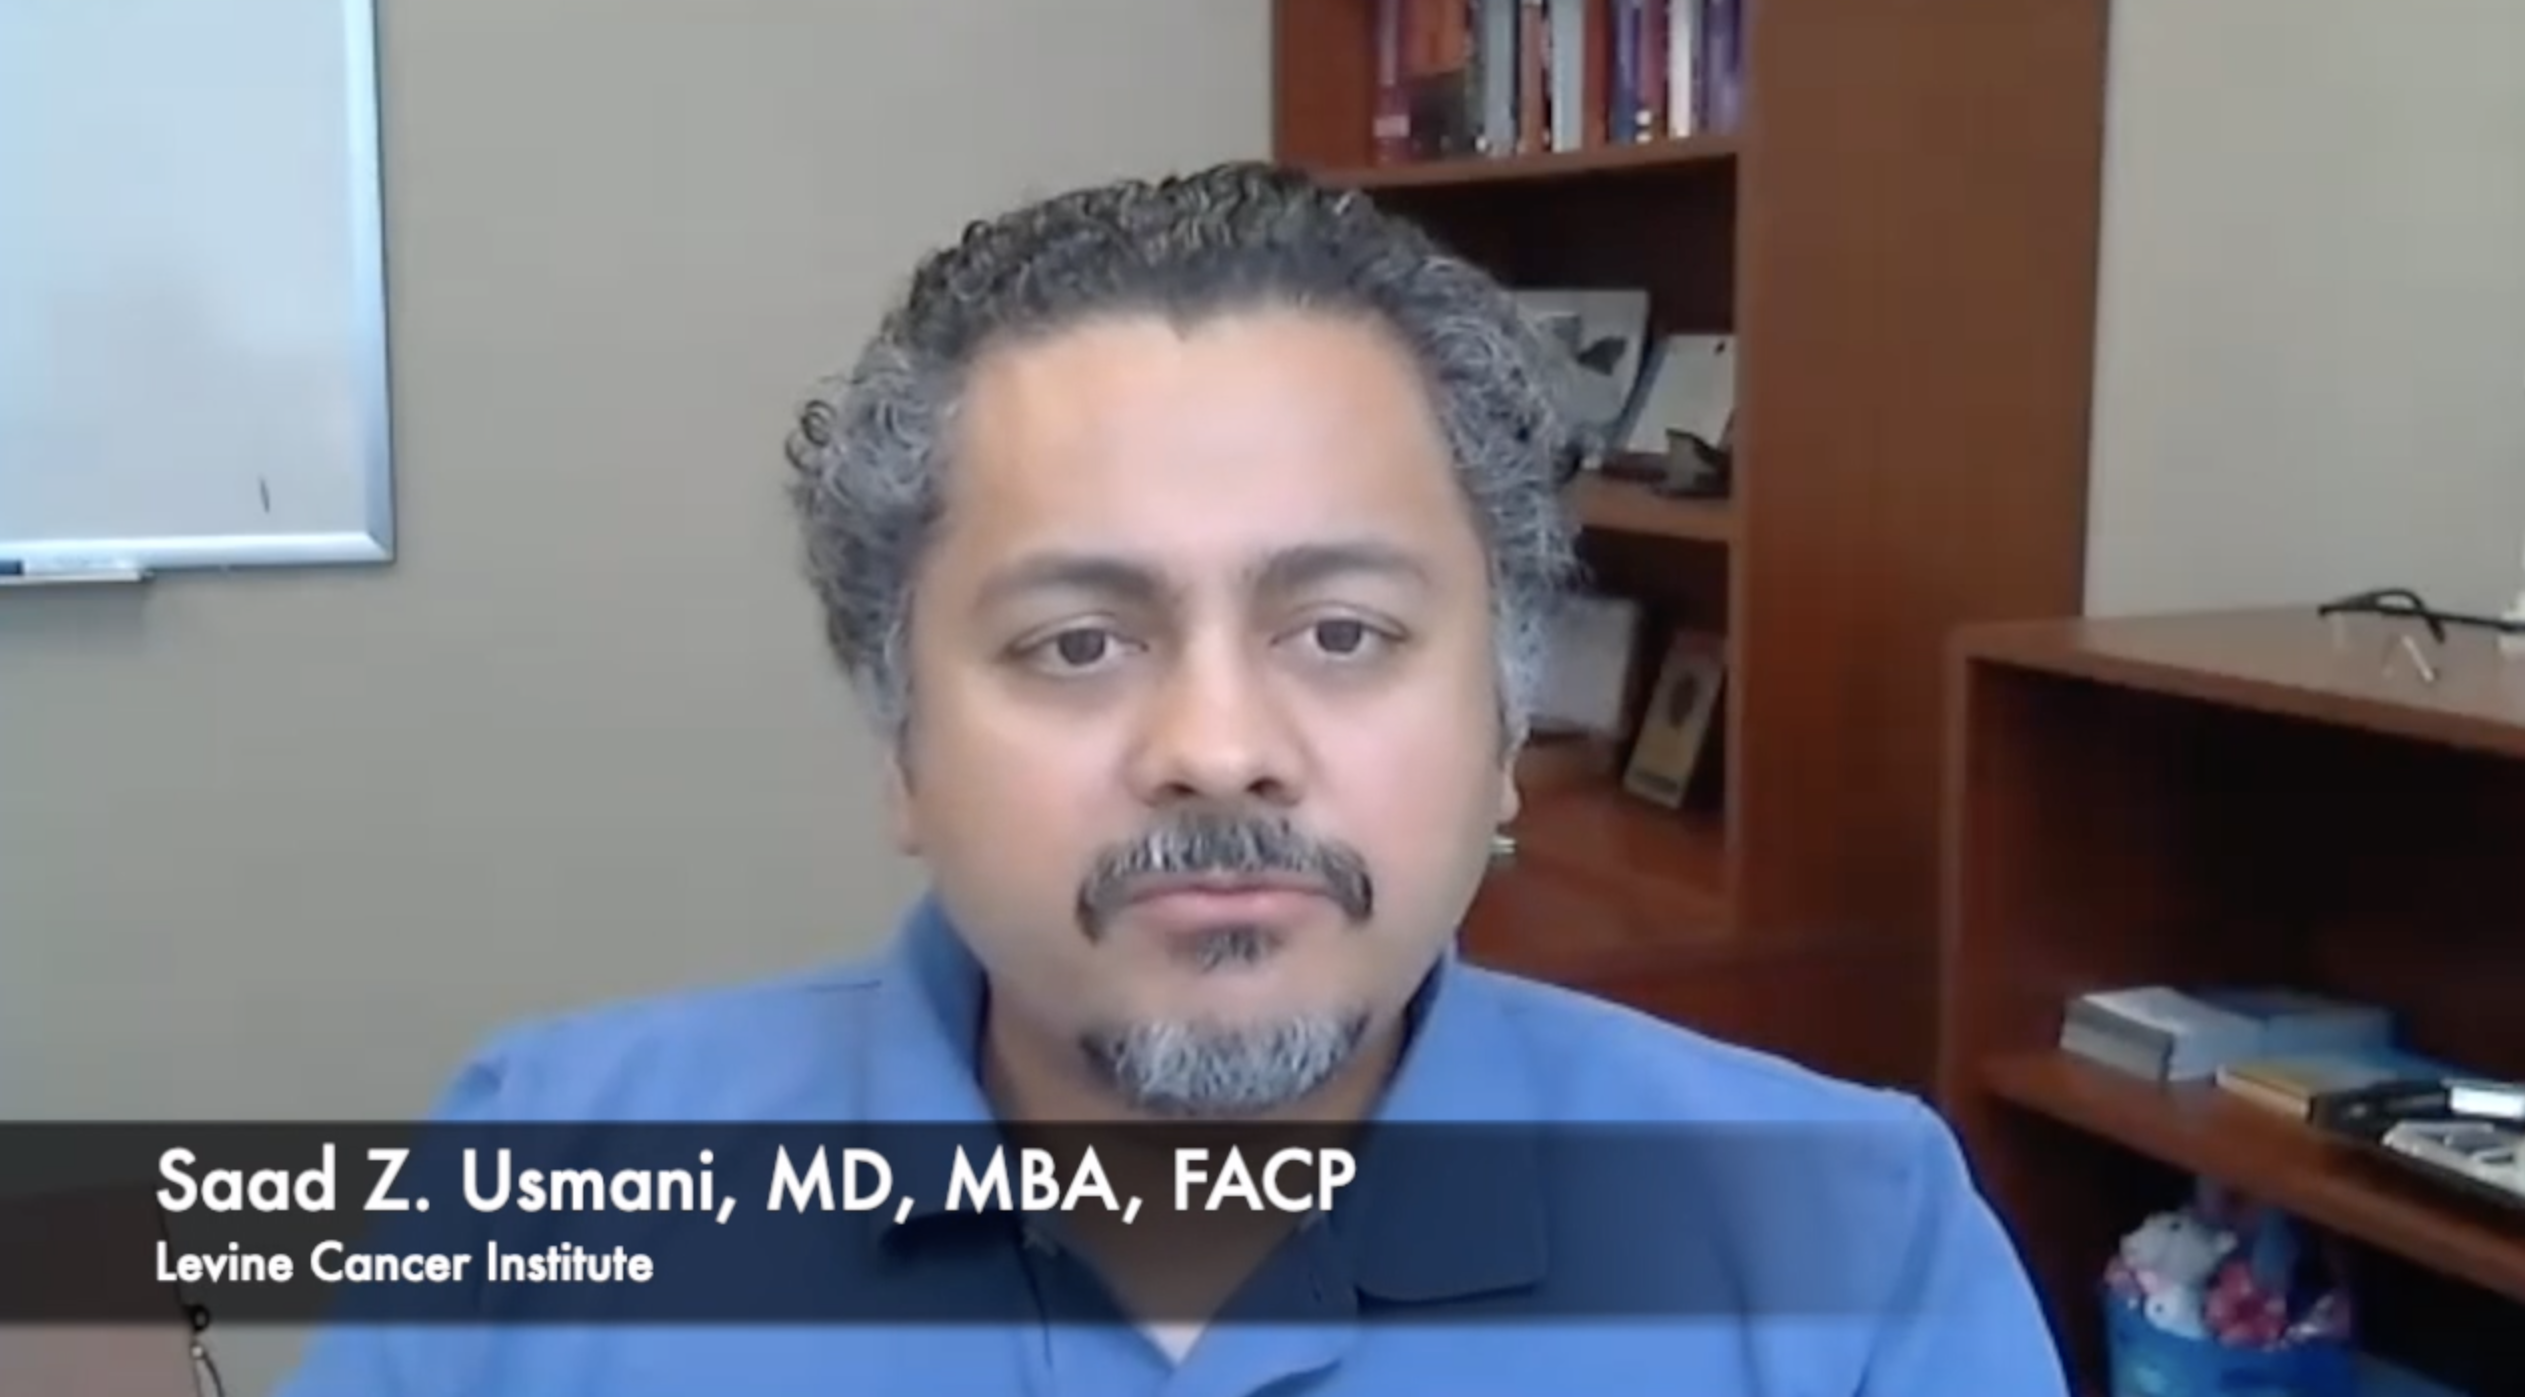 Saad Z. Usmani, MD, MBA, FACP, Details the Safety Profile for CARTITUDE-1 Trial